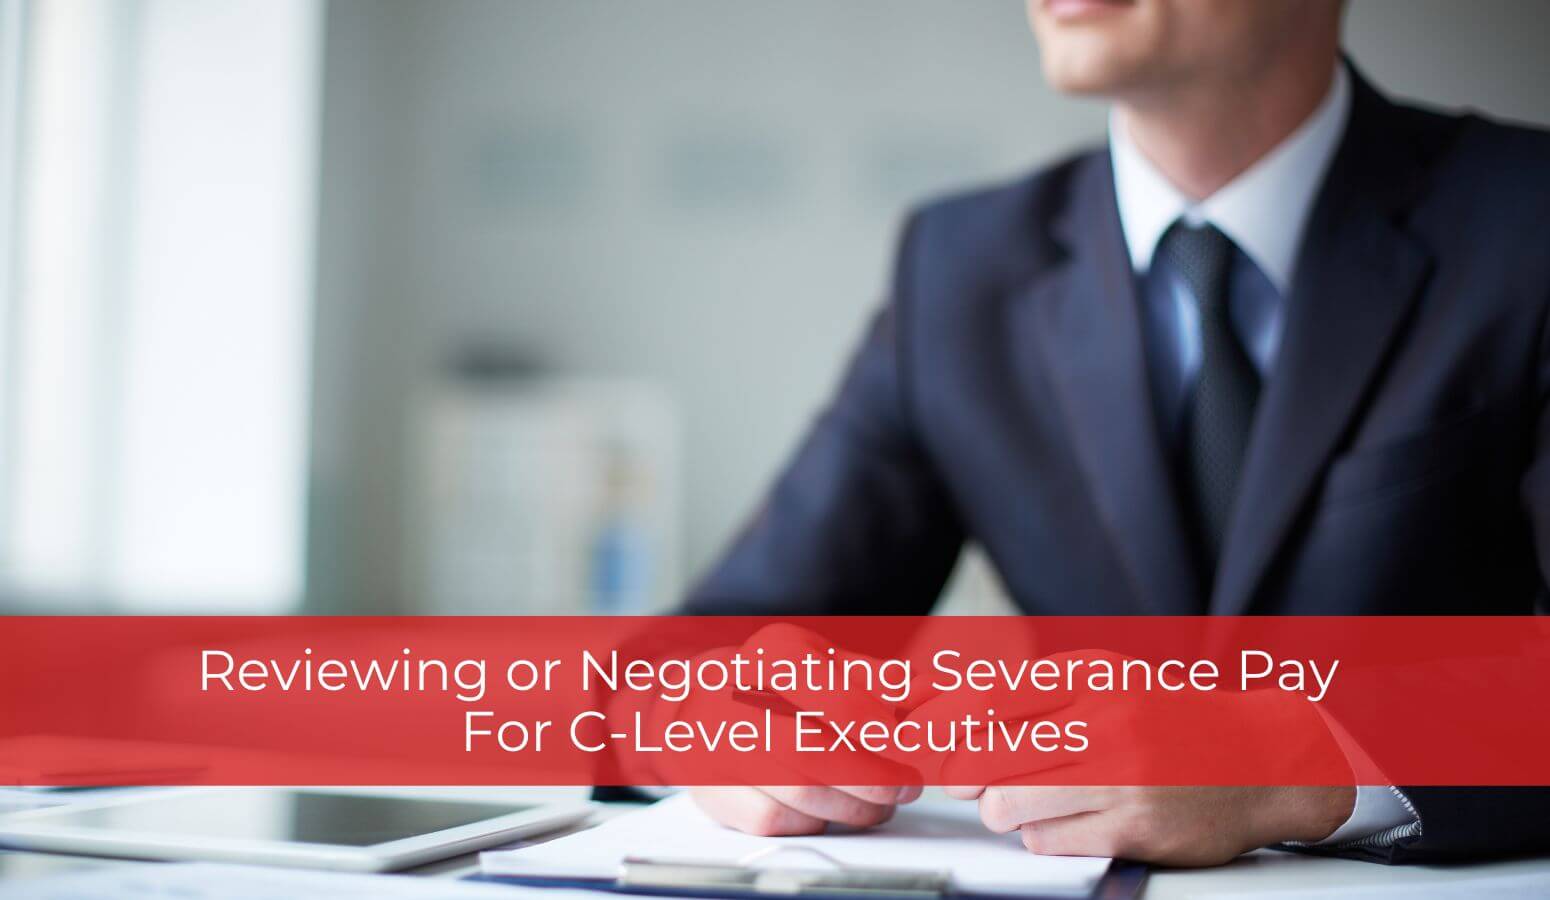 Featured image for “Reviewing or Negotiating Severance Pay for C-Level Executives”